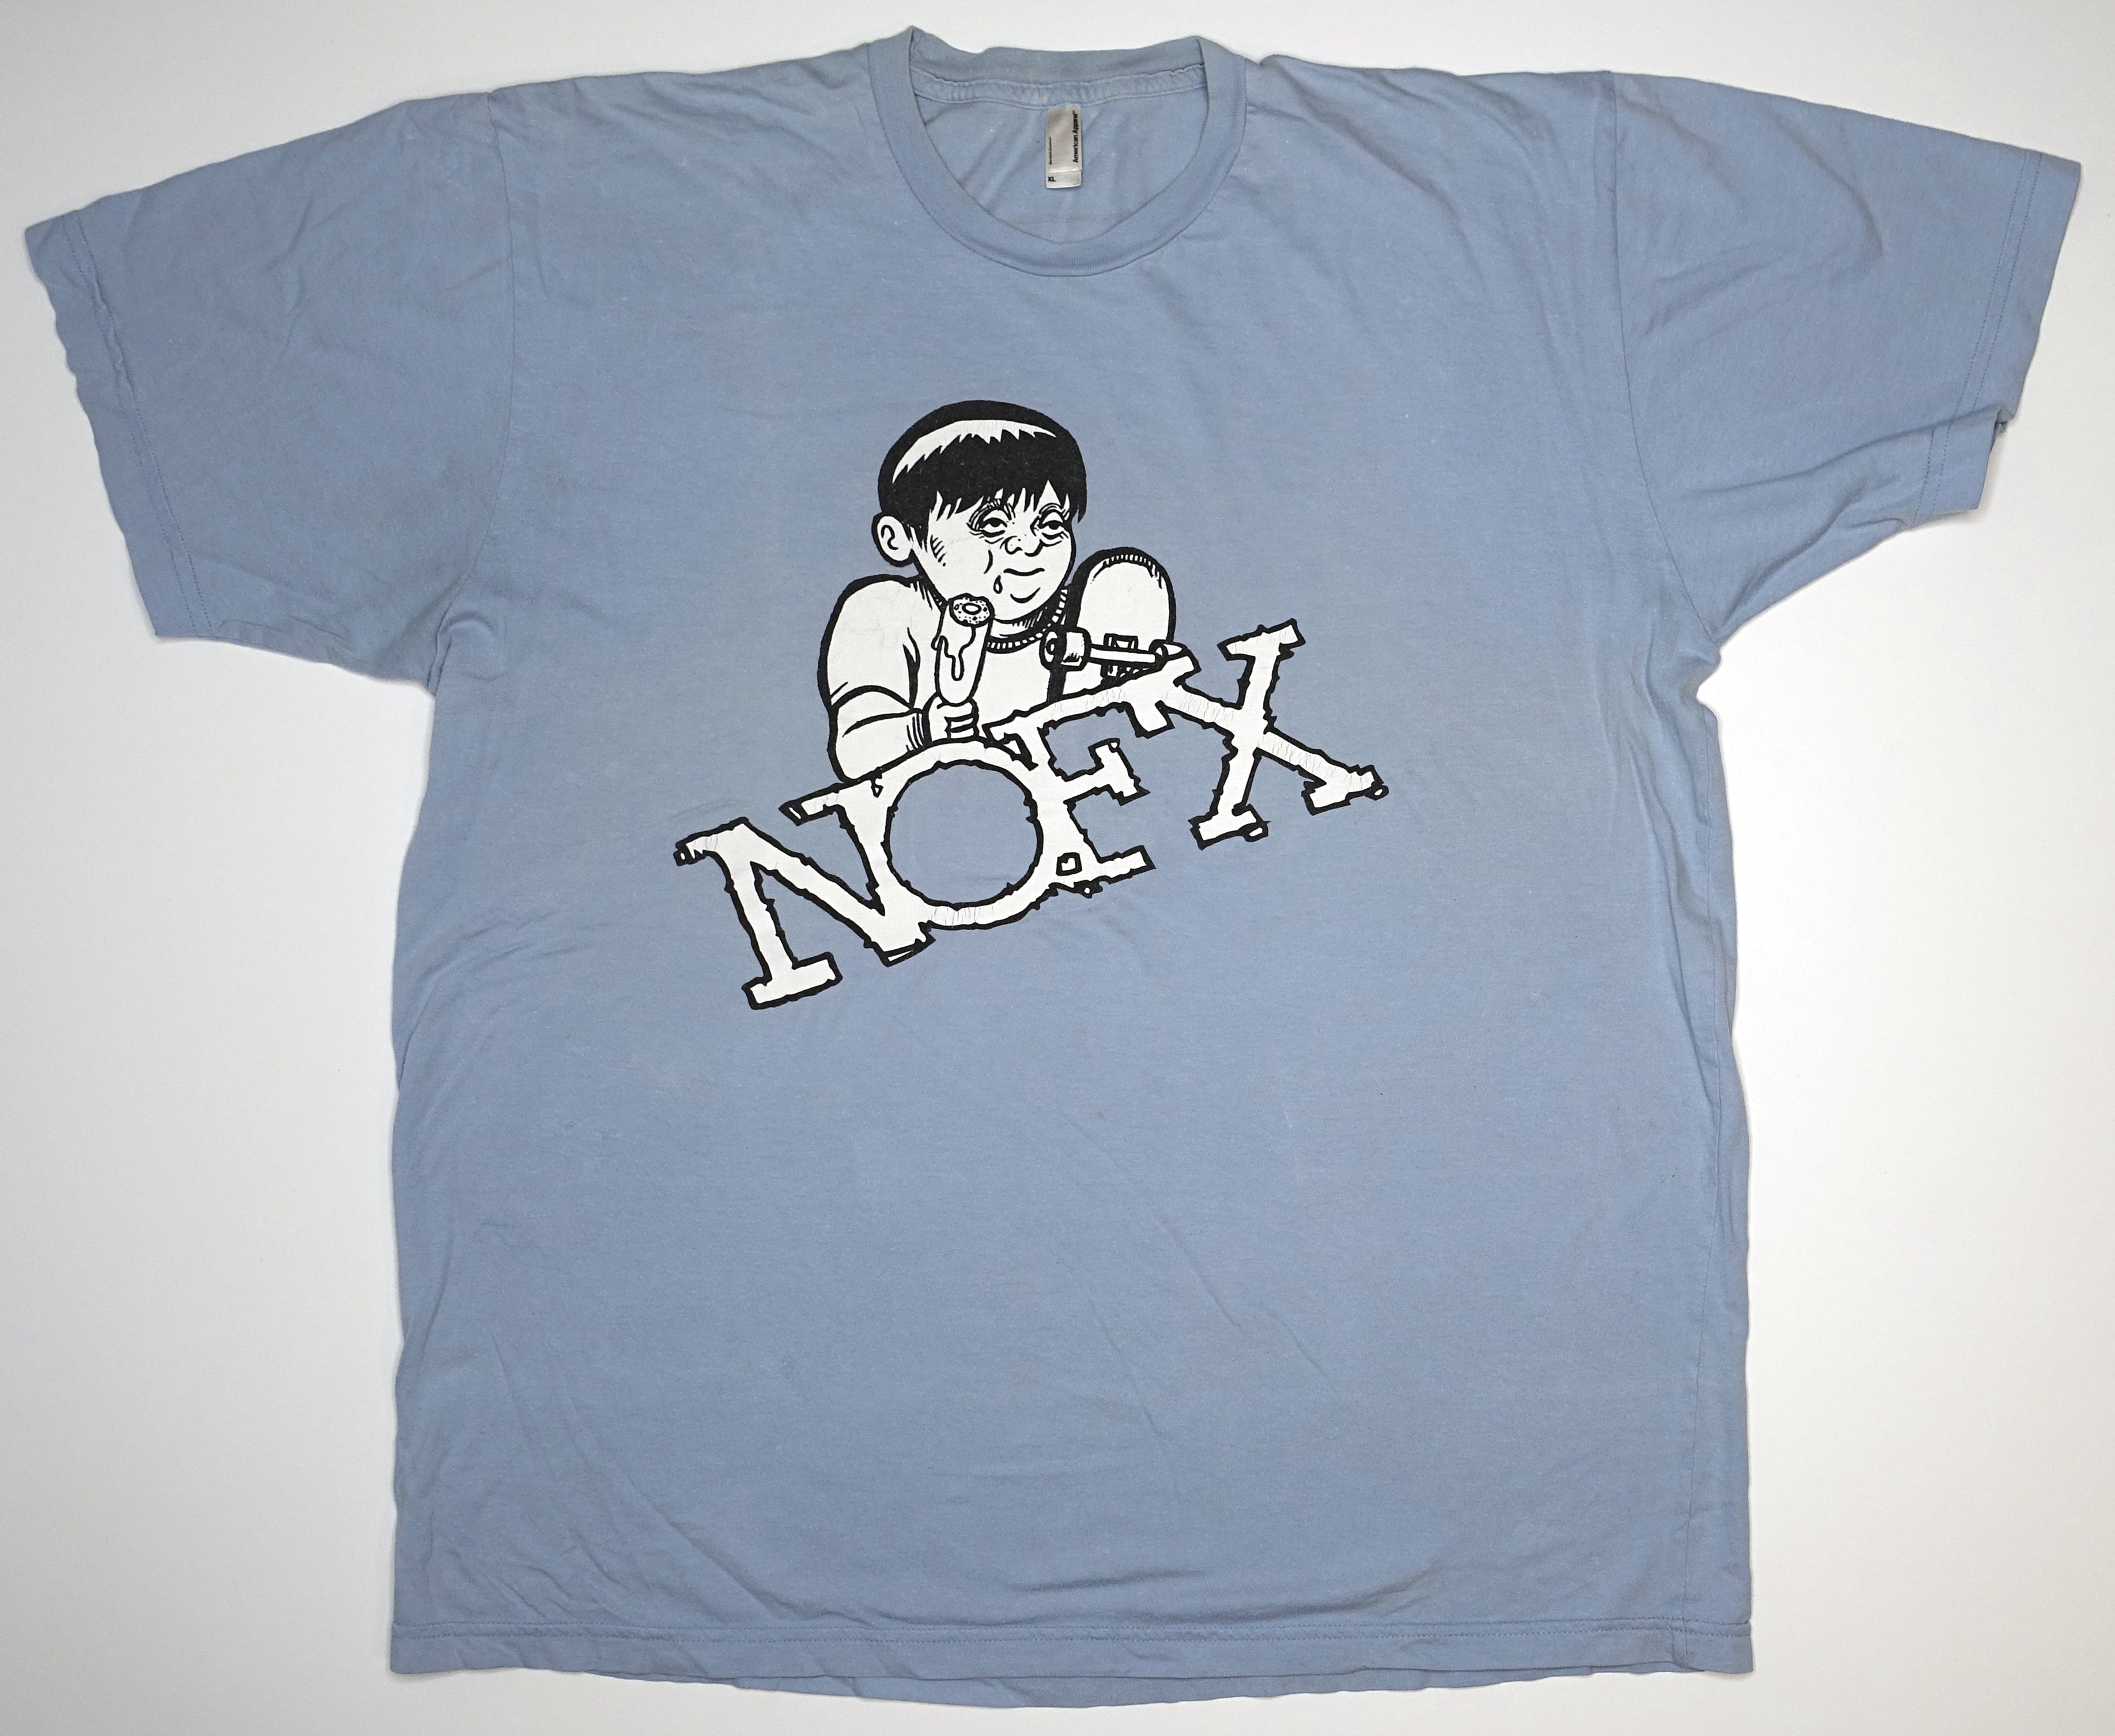 NOFX - The've Actually Gotten Worse Live May 2008 Tour Shirt Size XL